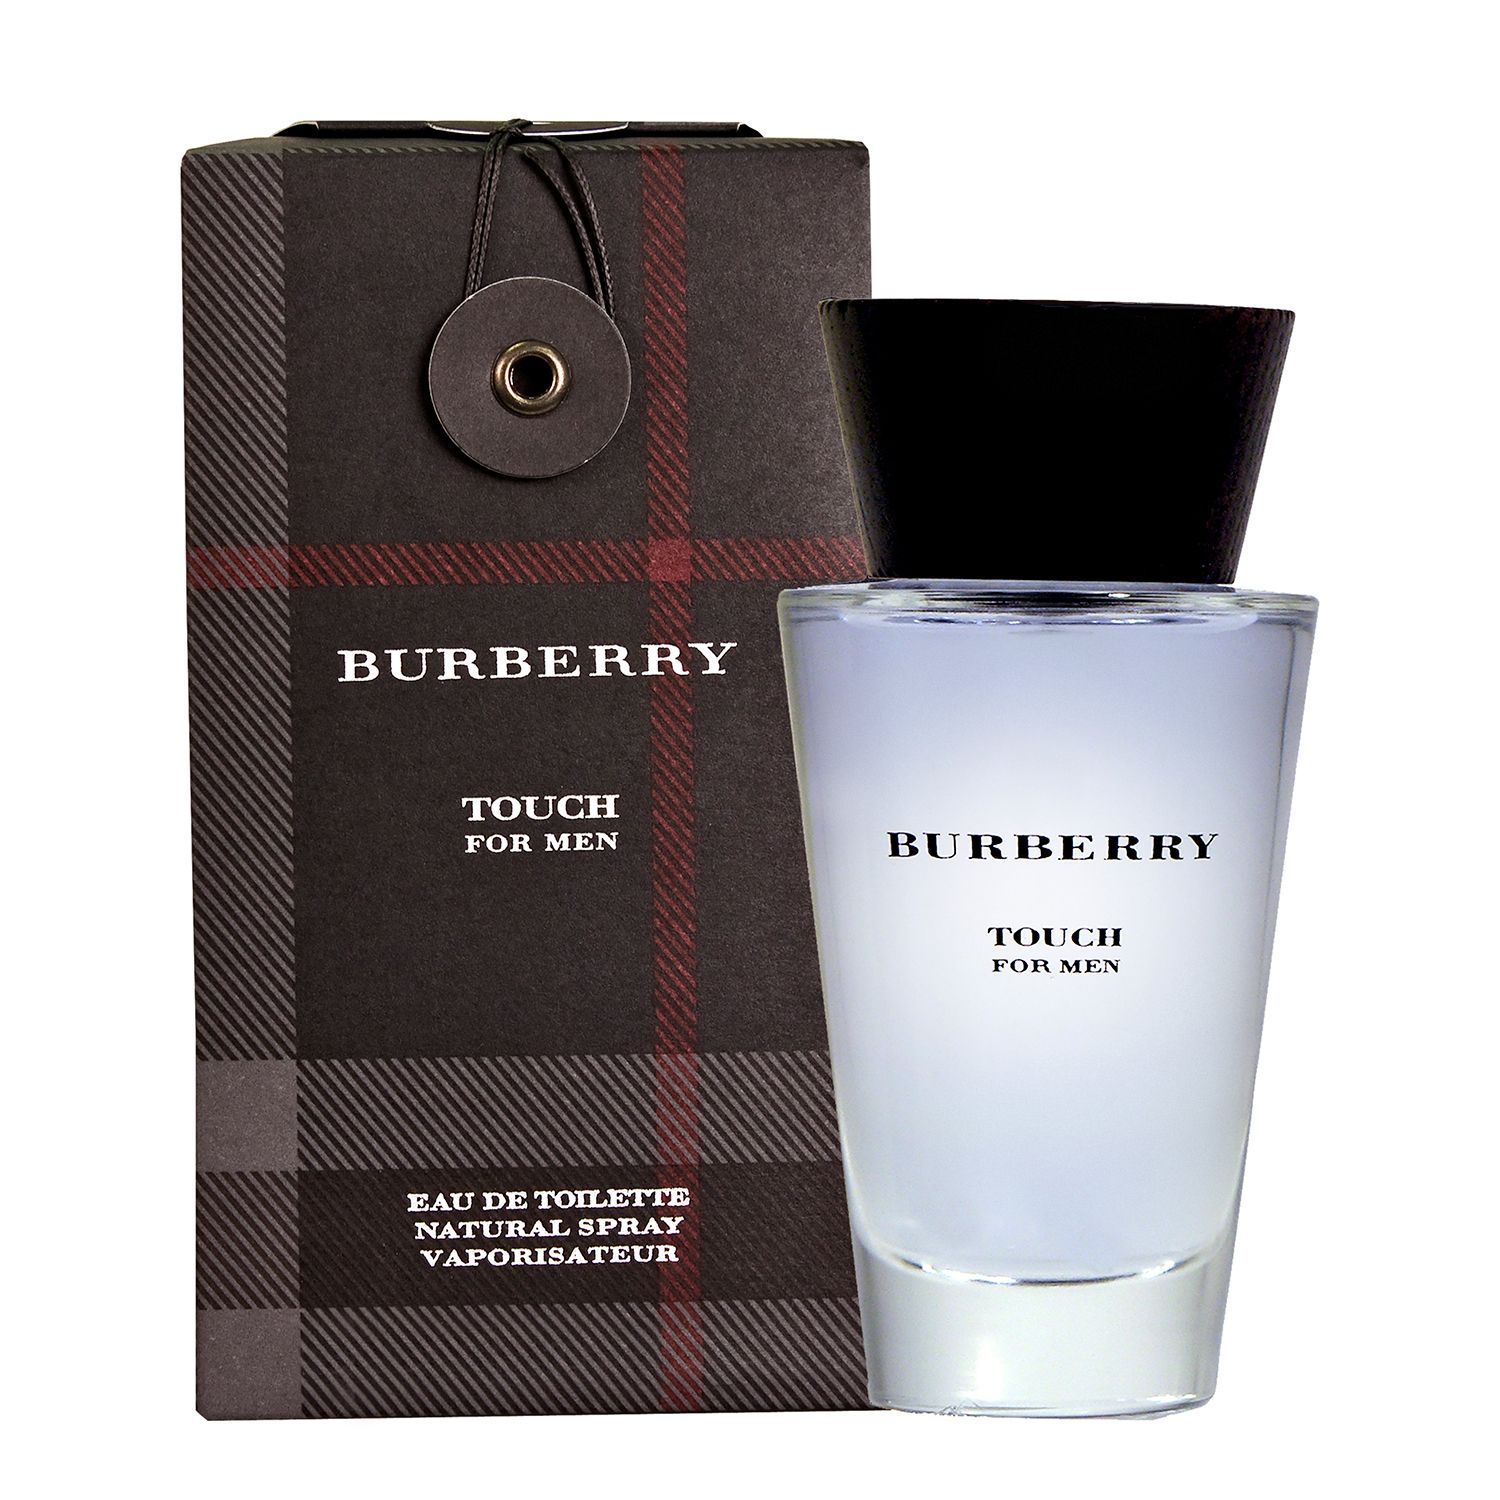 burberry touch men's cologne